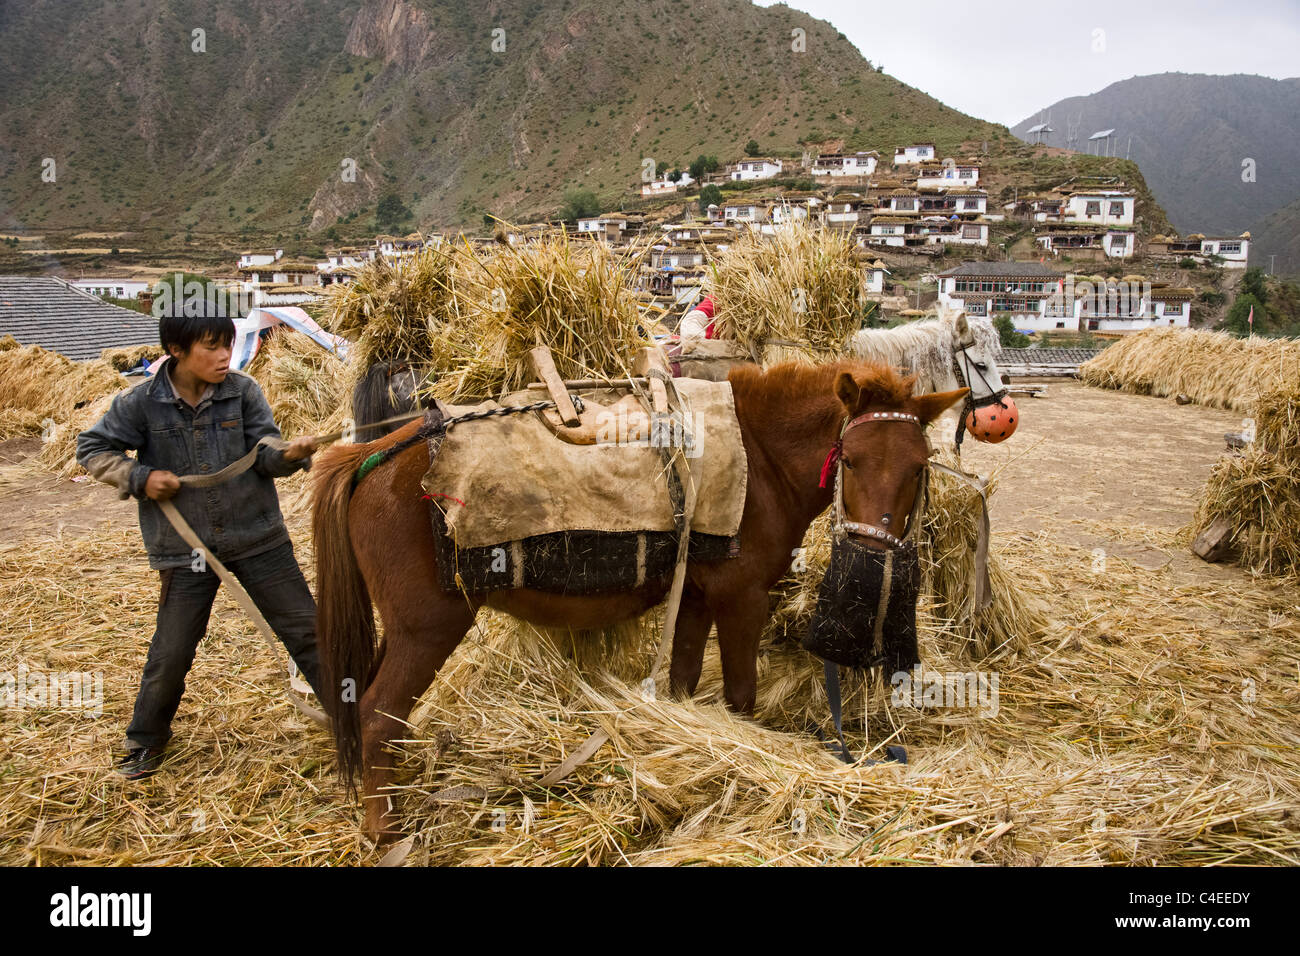 Horses carrying hay back from fields, Lie Da village, Yu Qu valley (a tributary of the Brahmaputra), Tibet. China Stock Photo